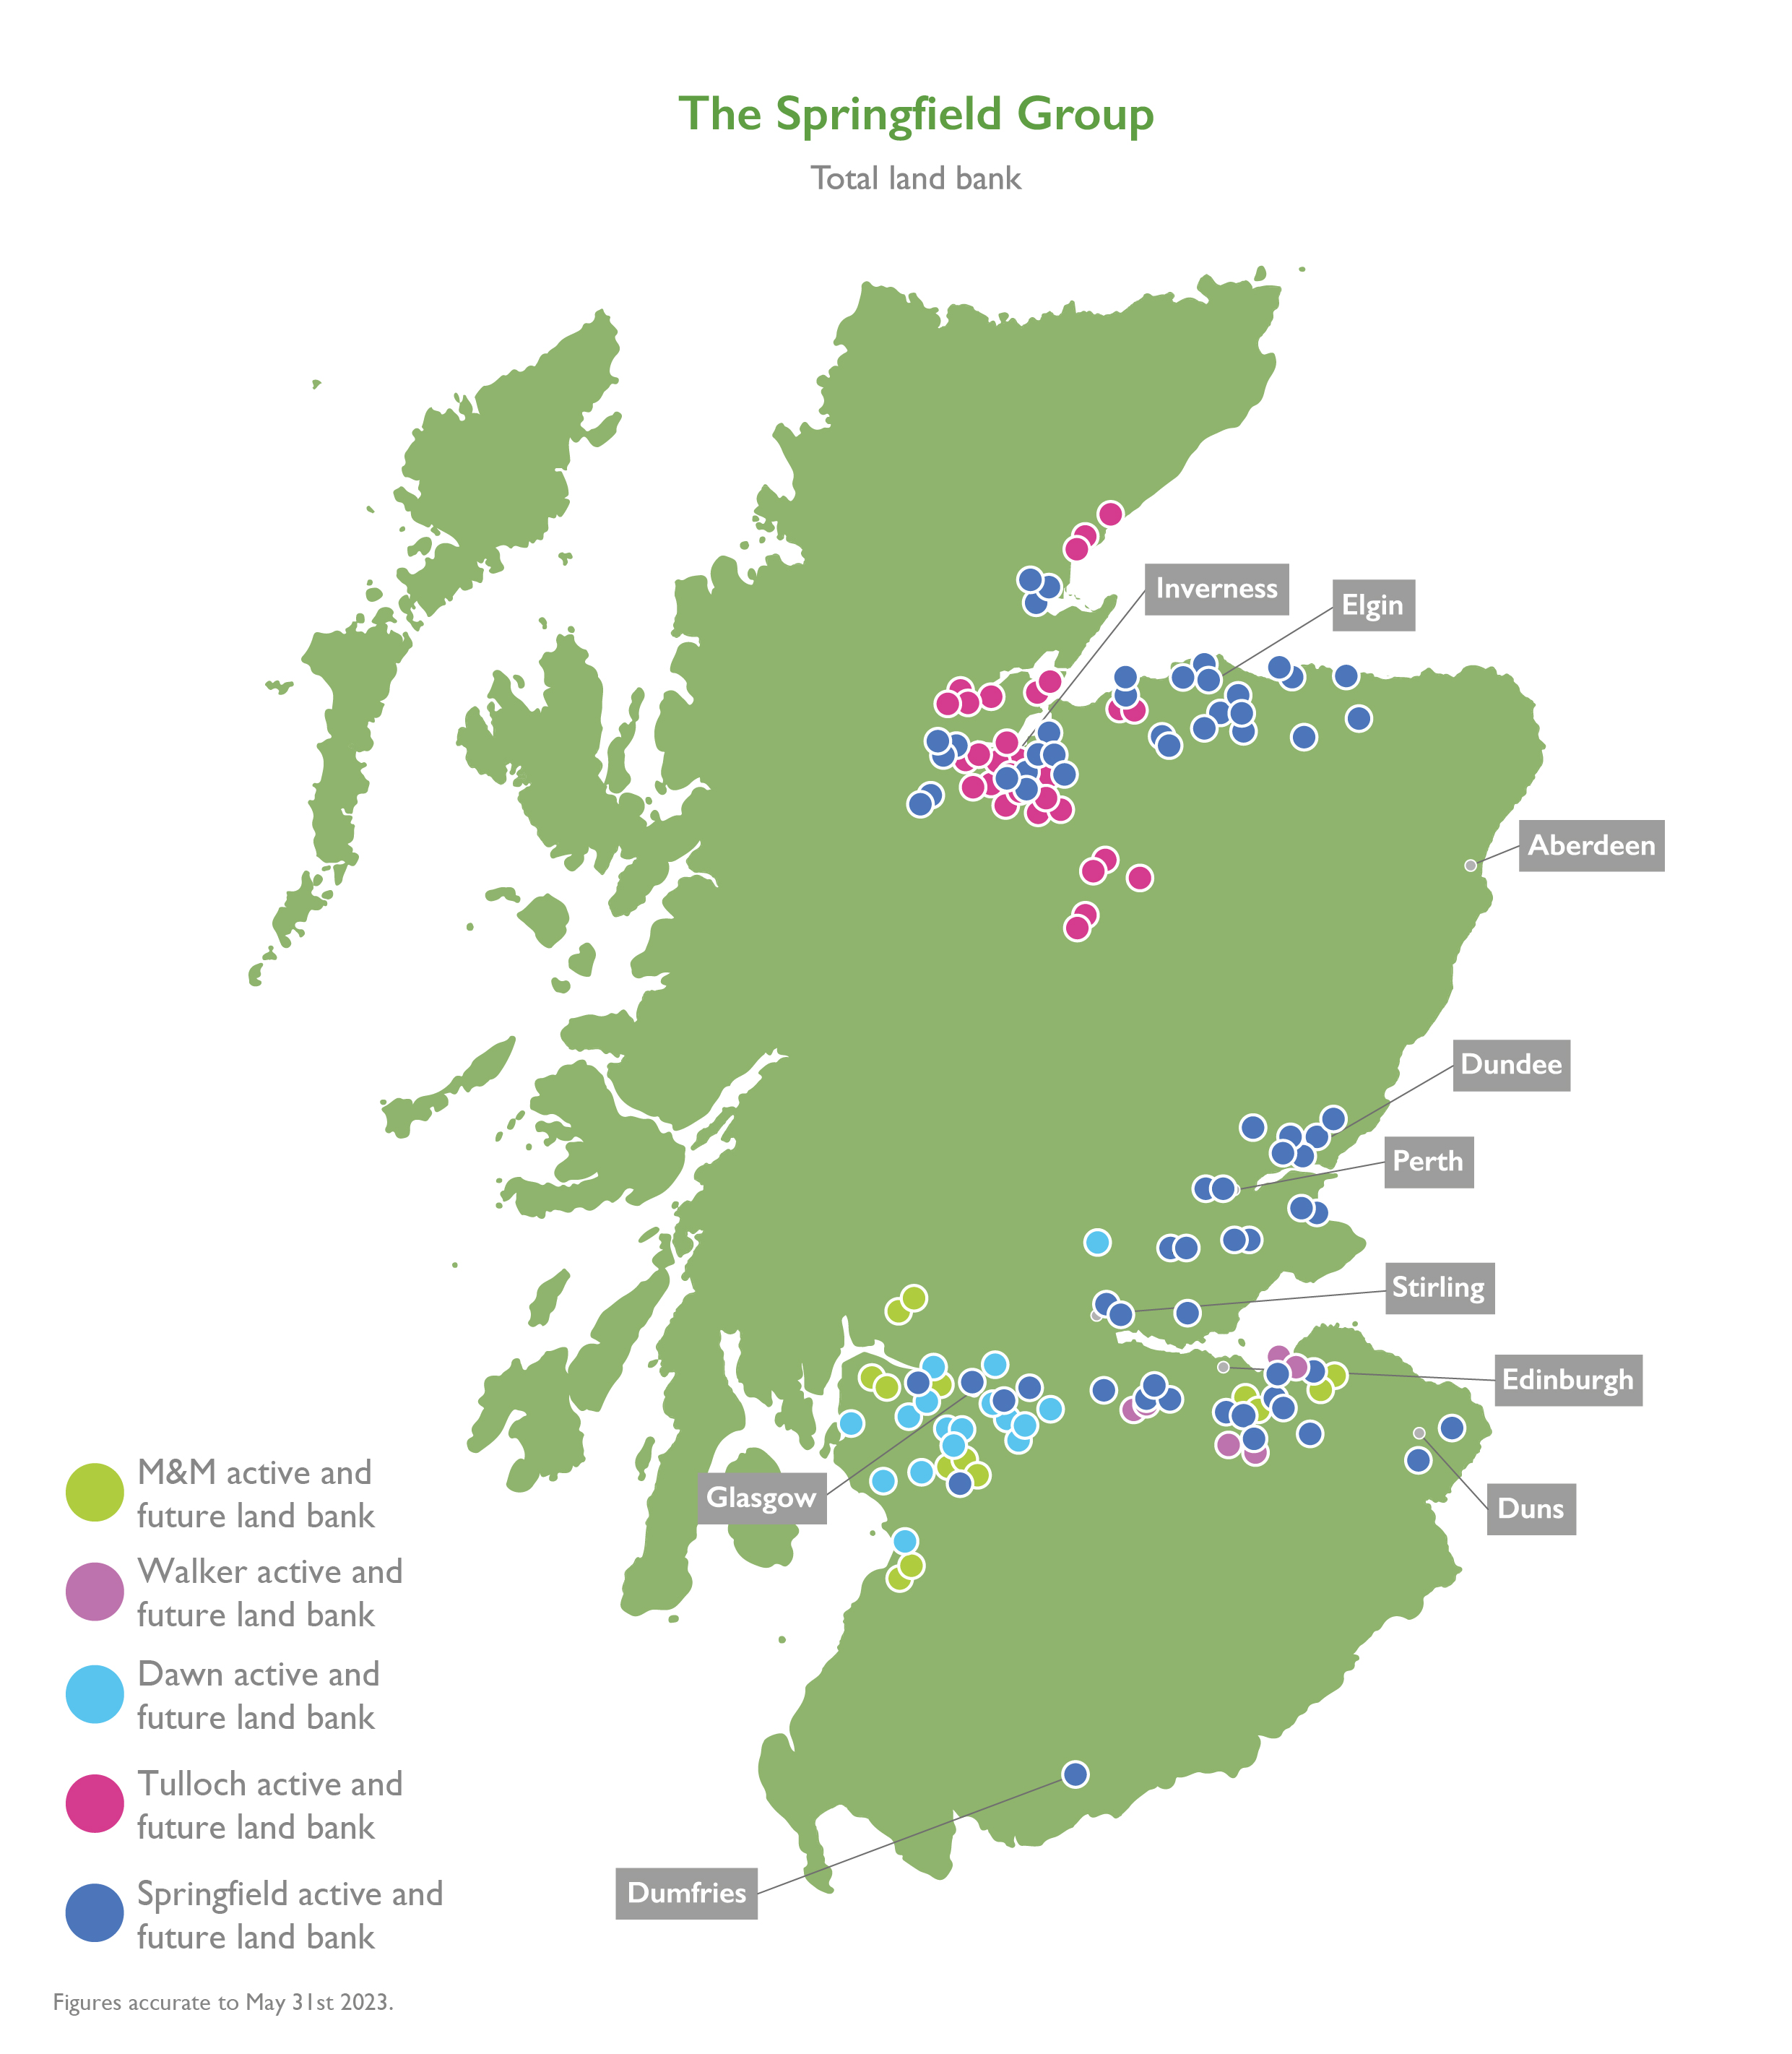 Map of Scotland detailing the geographic reach of The Springfield Group.